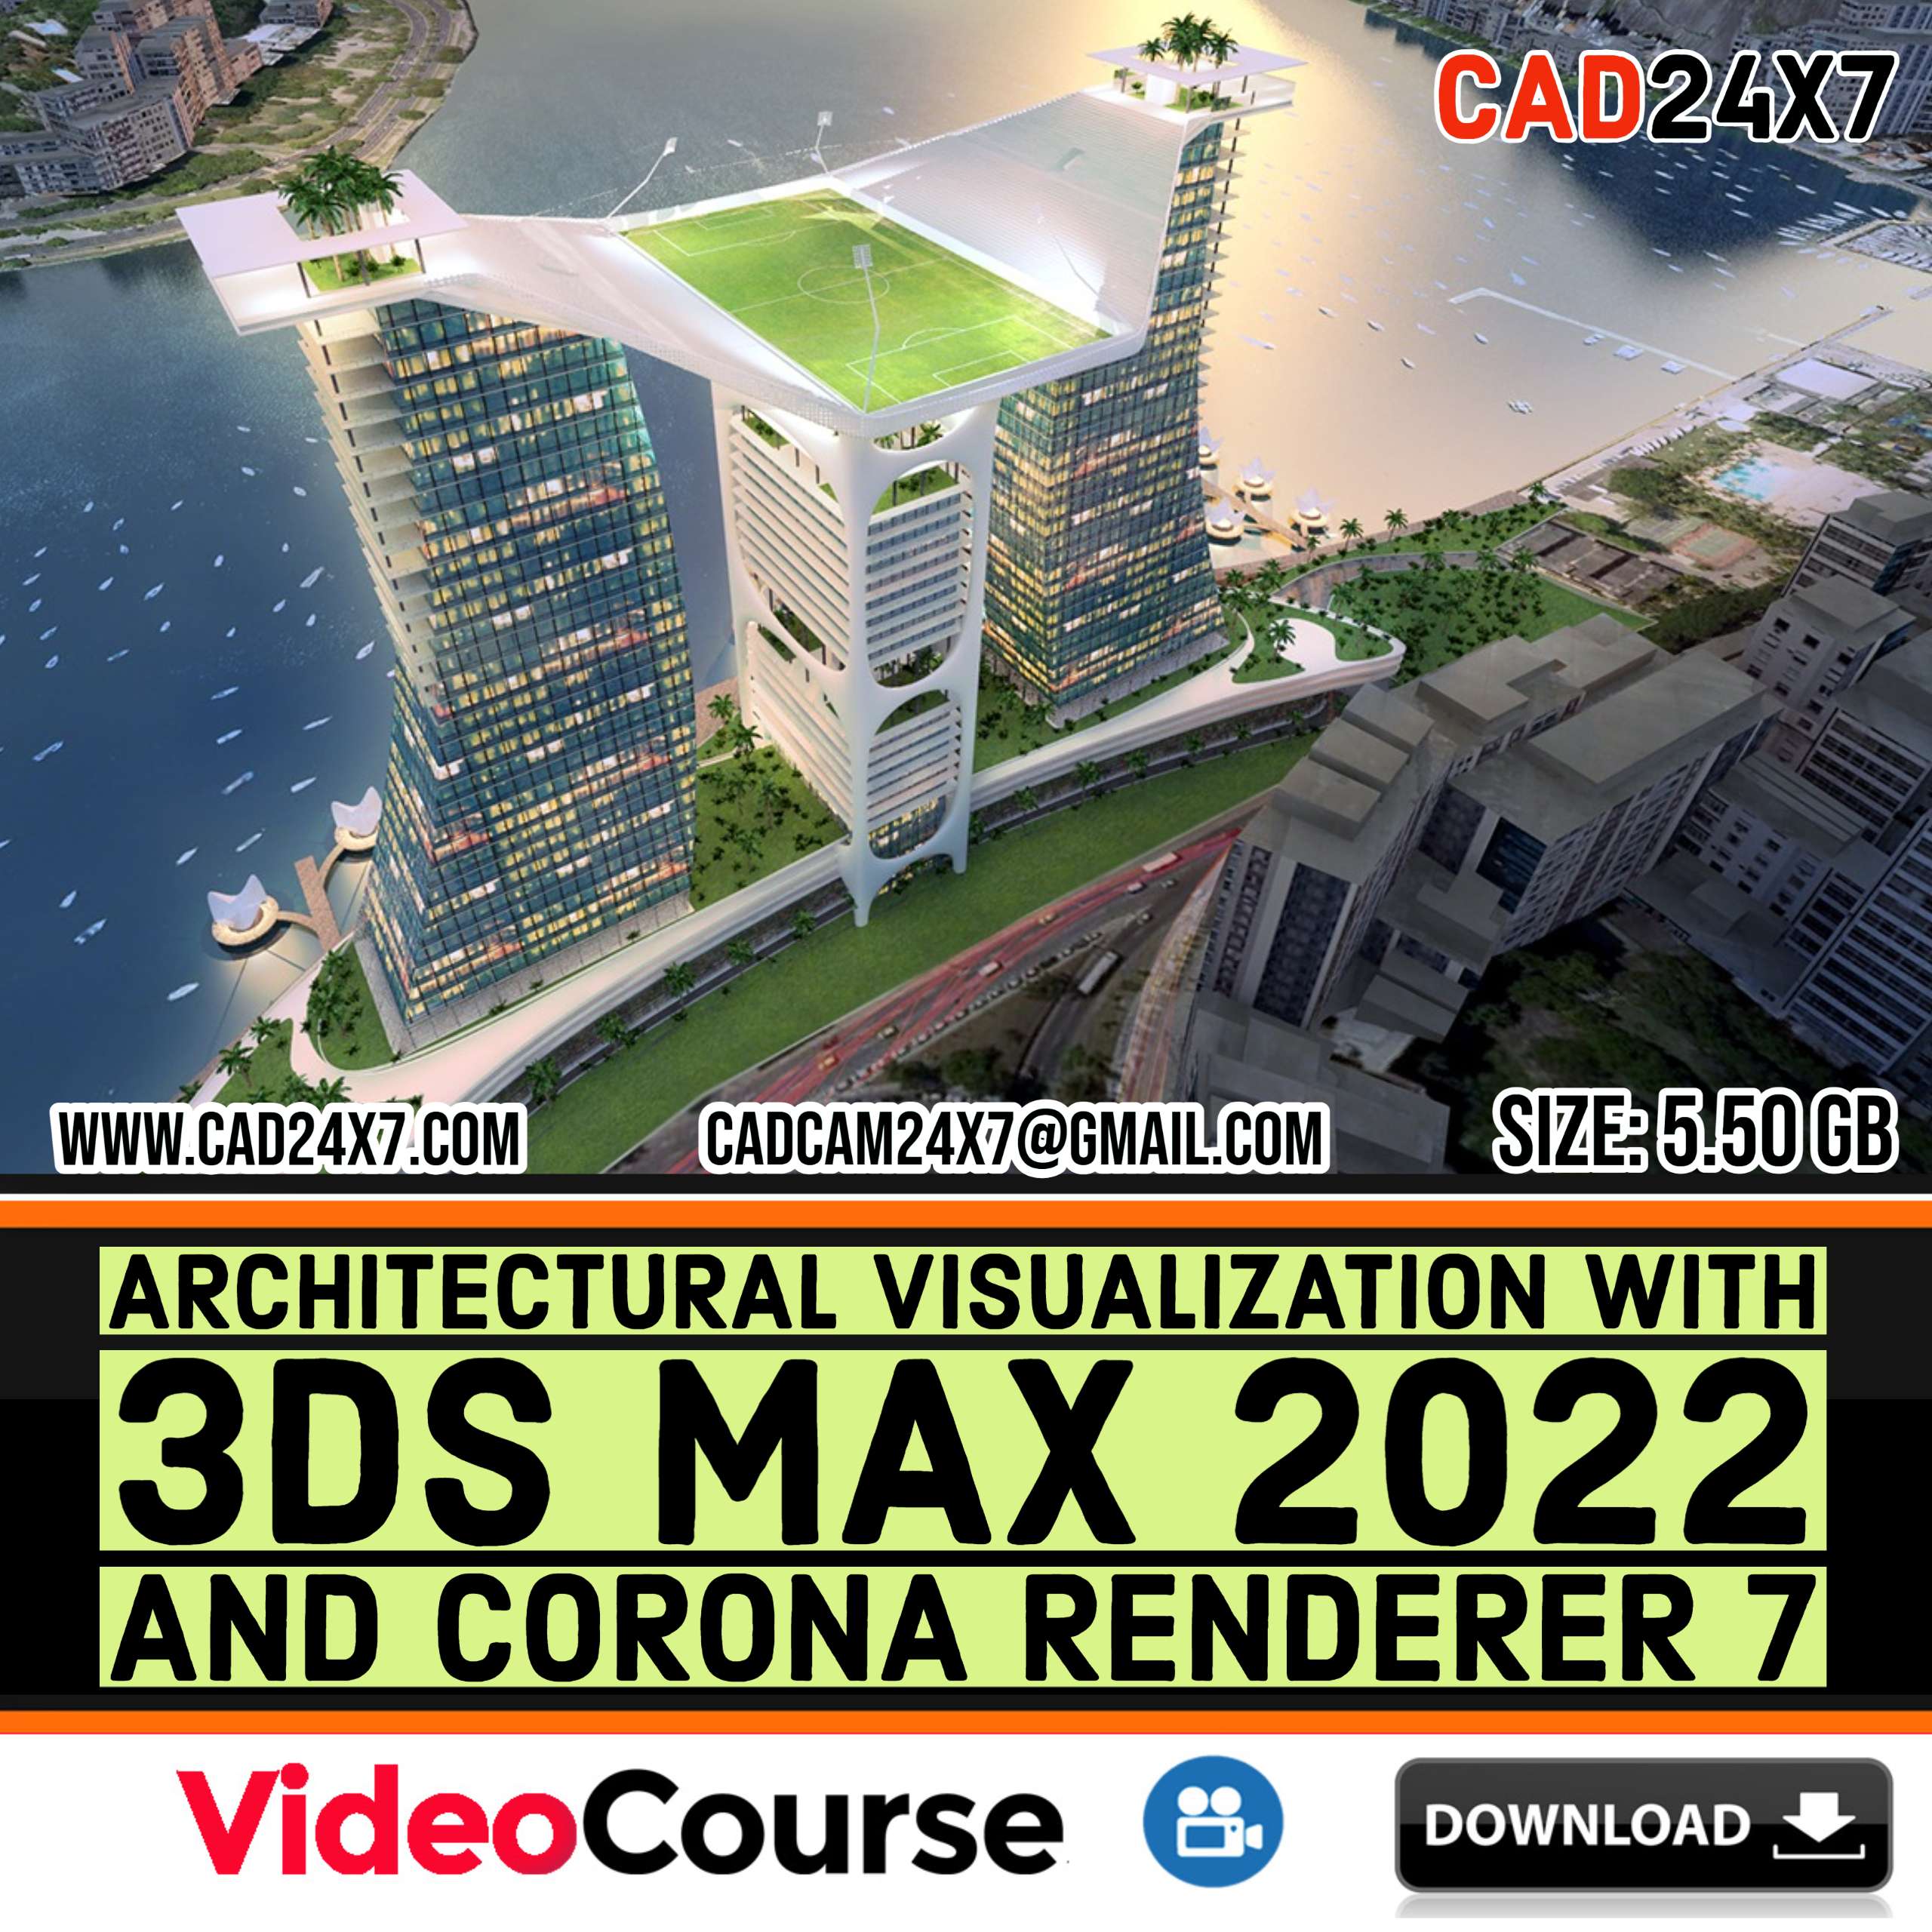 Architectural visualization with 3ds Max 2022 and Corona Renderer 7